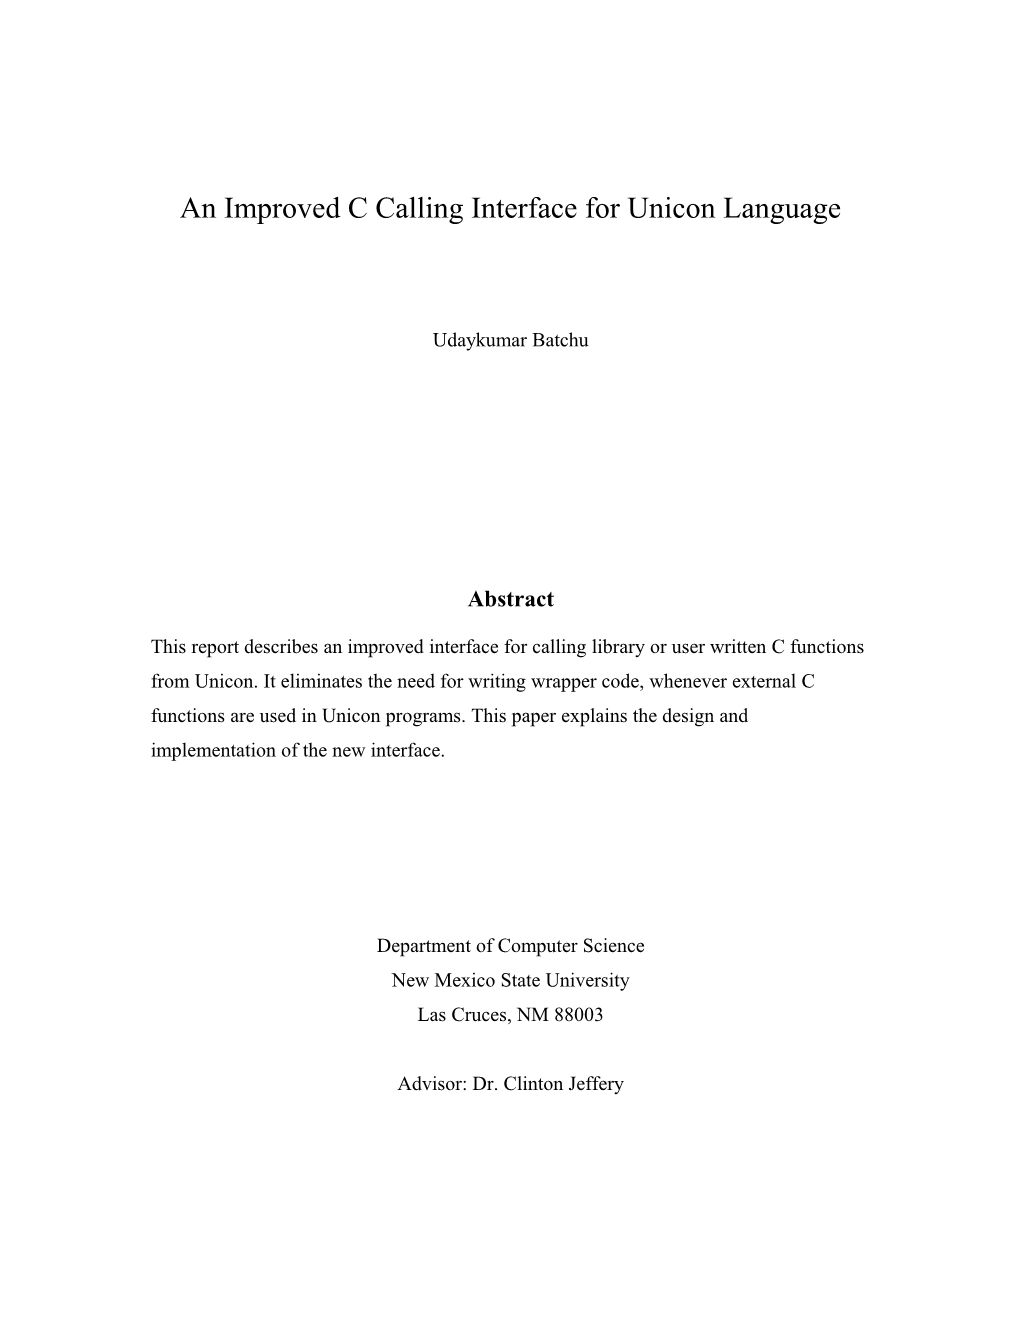 A C Calling Interface for Unicon Language